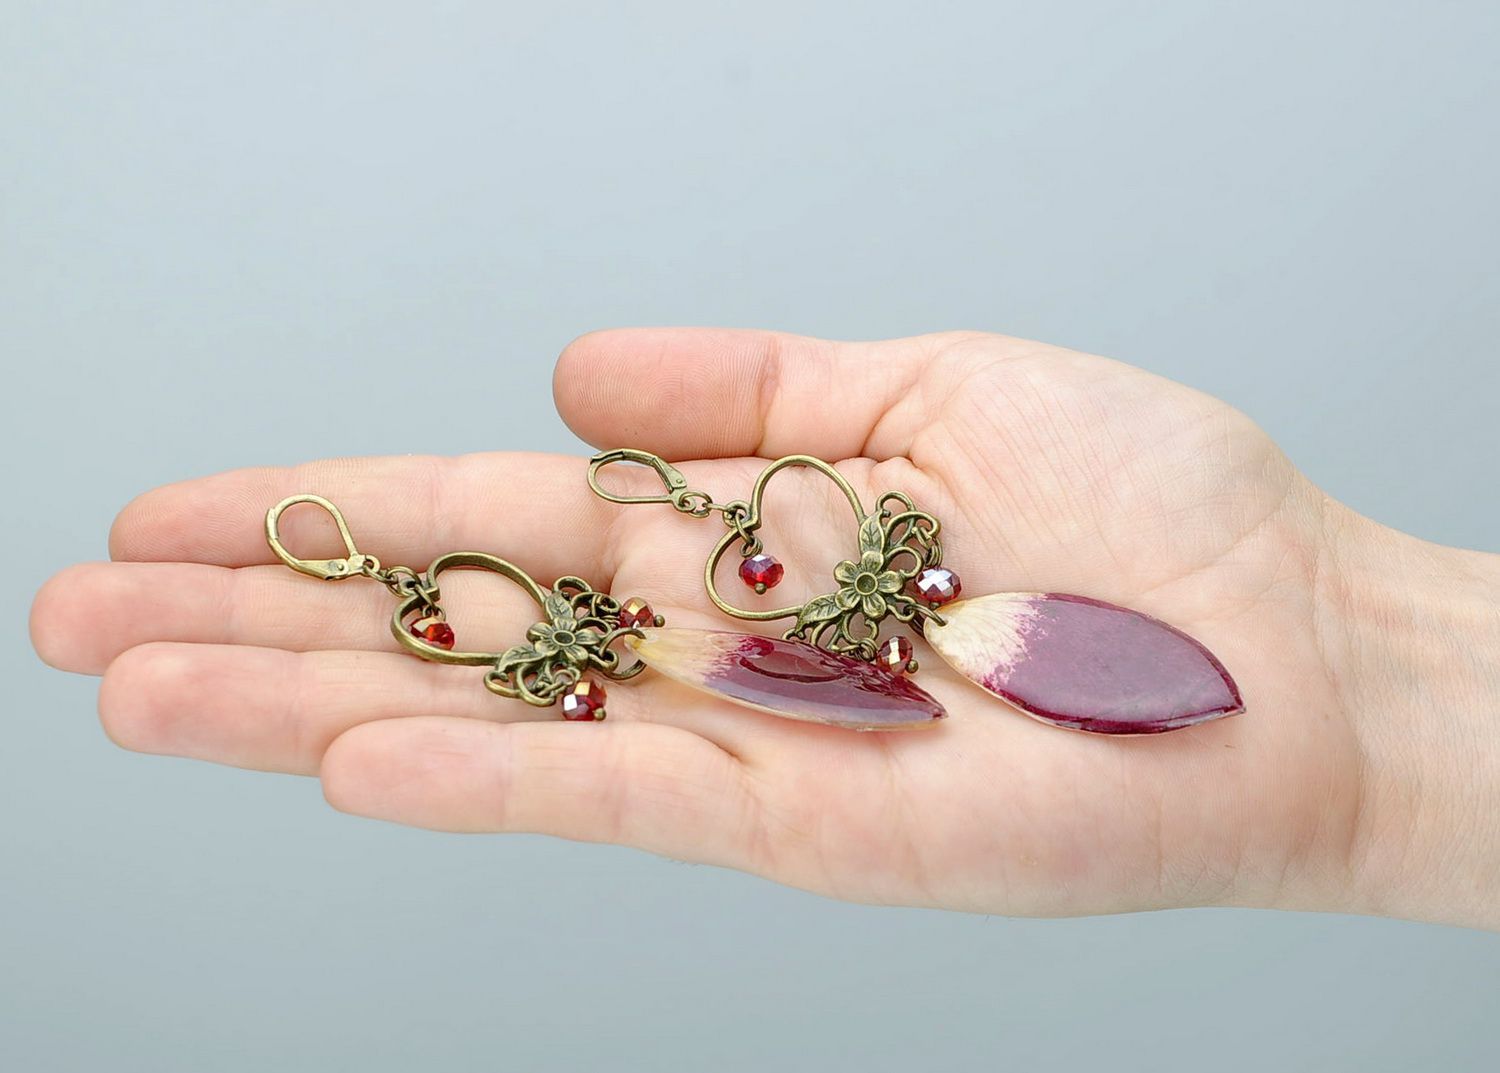 BUY Earrings made from rose petals and crystal beads 317148028 ...